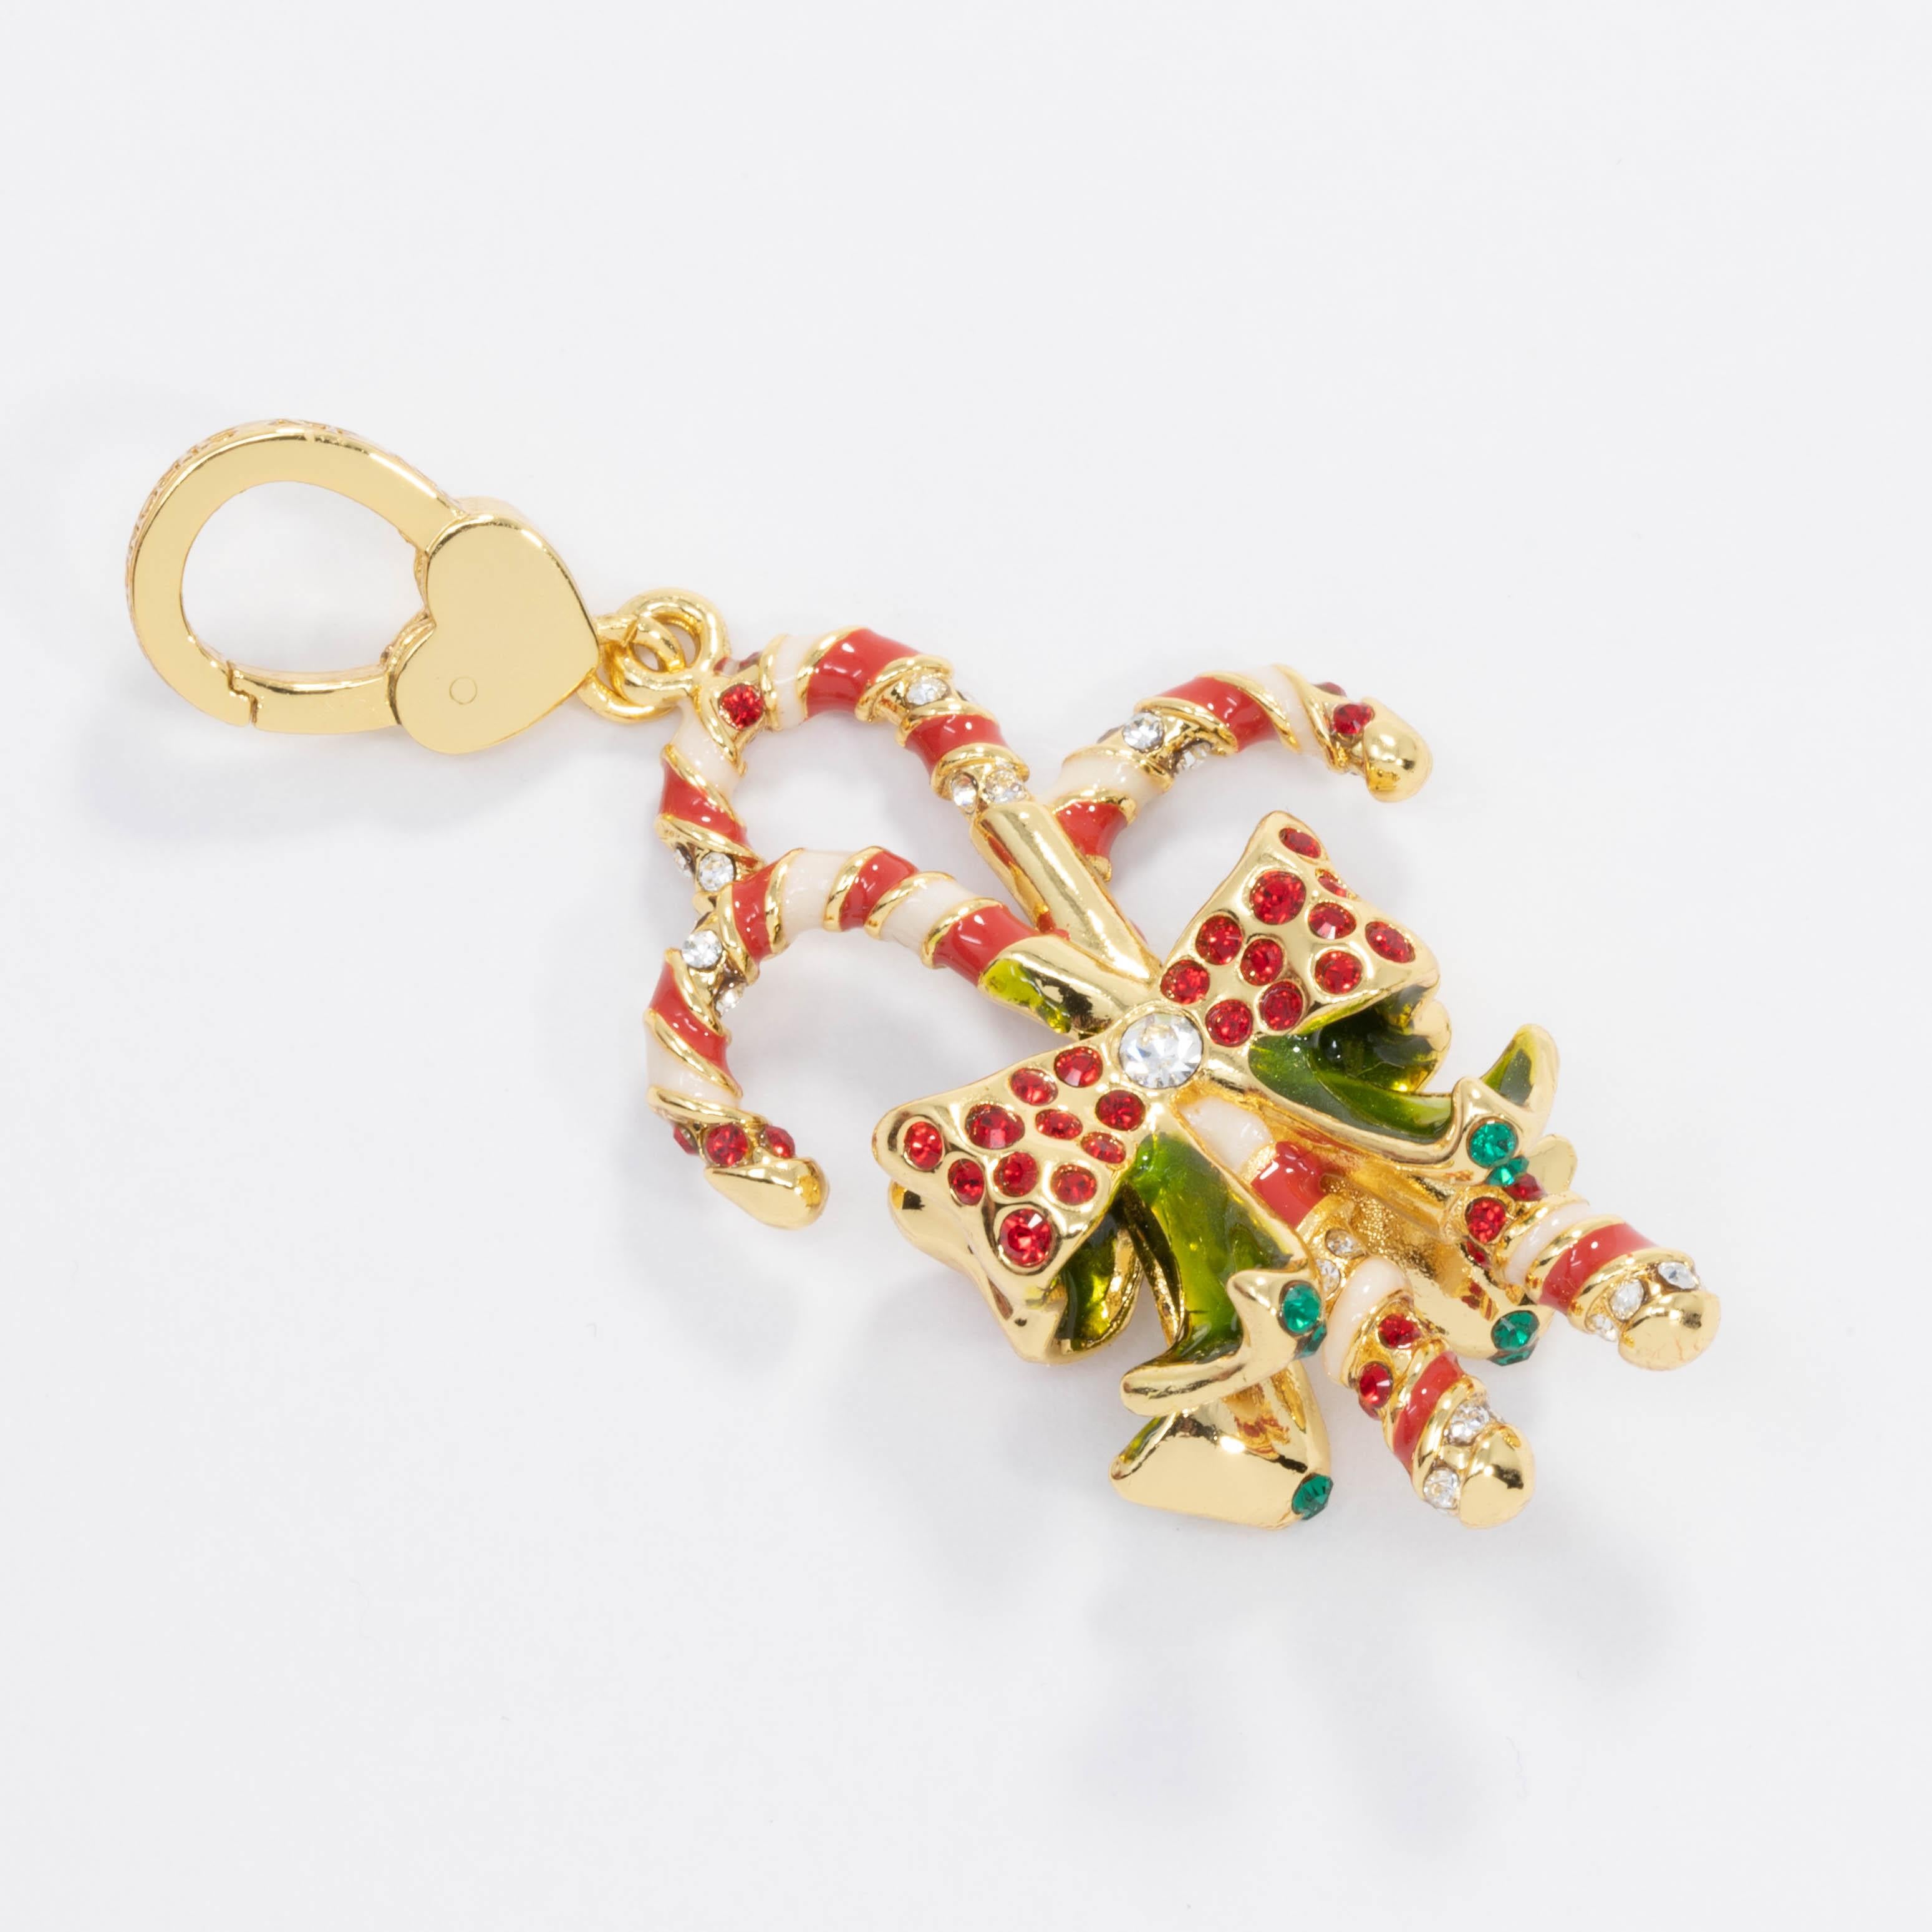 A festive candy cane cluster charm, featuring three red and white enamel painted candy canes wrapped with a crystal-accented bow motif. Can be worn as a necklace pendant or a charm accessory. Gold plated.

From exclusive JAY line by Jay Strongwater